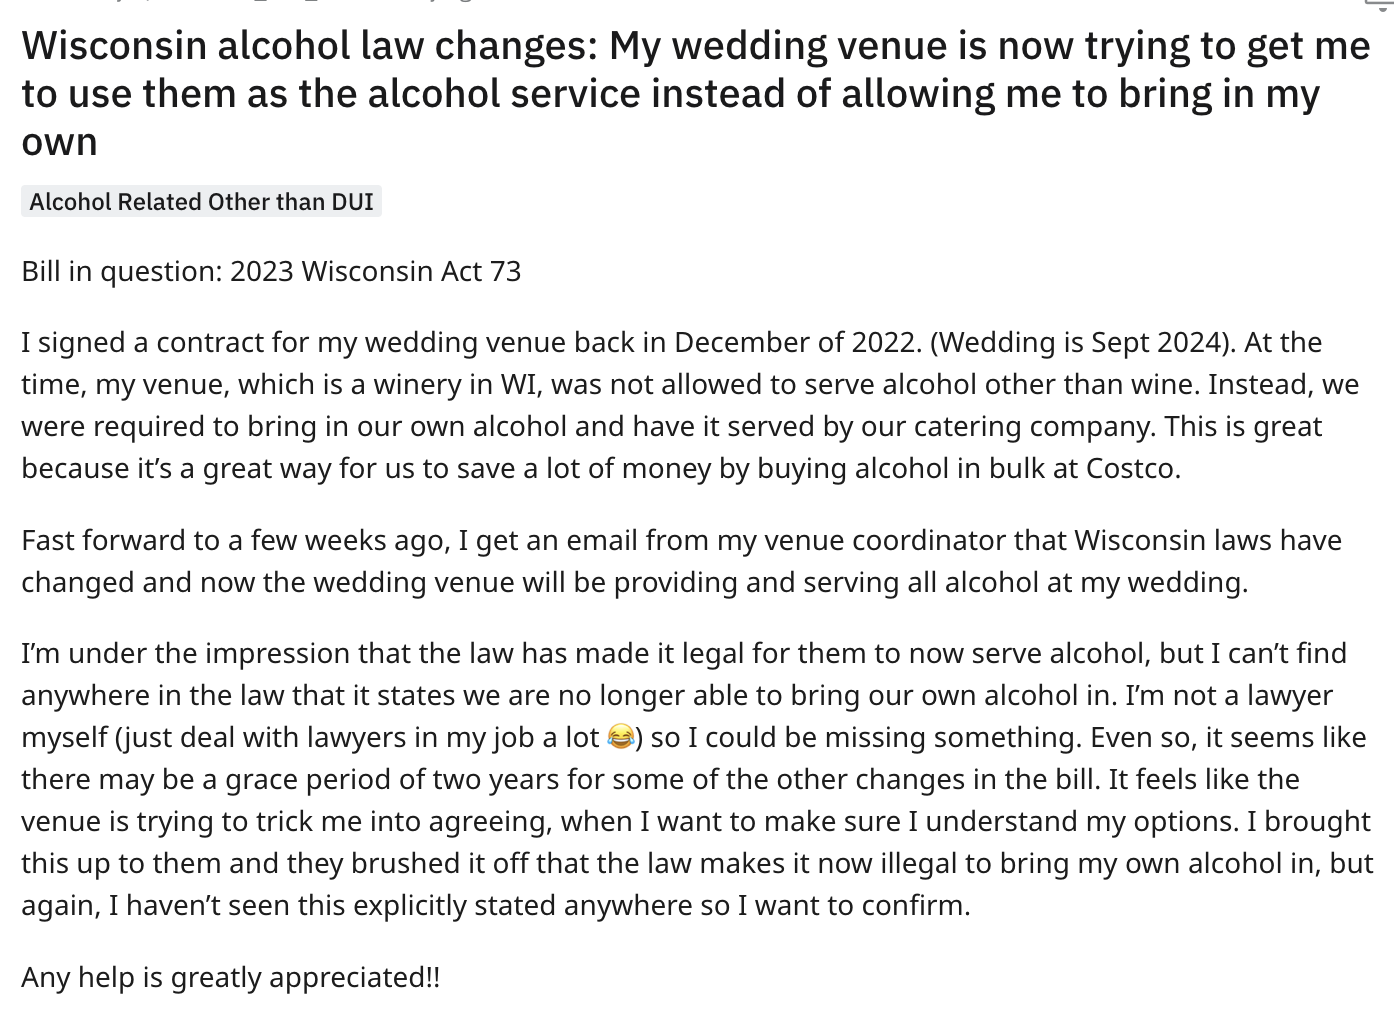 premier bank and trust is considering giving alou company a loan - Wisconsin alcohol law changes My wedding venue is now trying to get me to use them as the alcohol service instead of allowing me to bring in my own Alcohol Related Other than Dui Bill in q